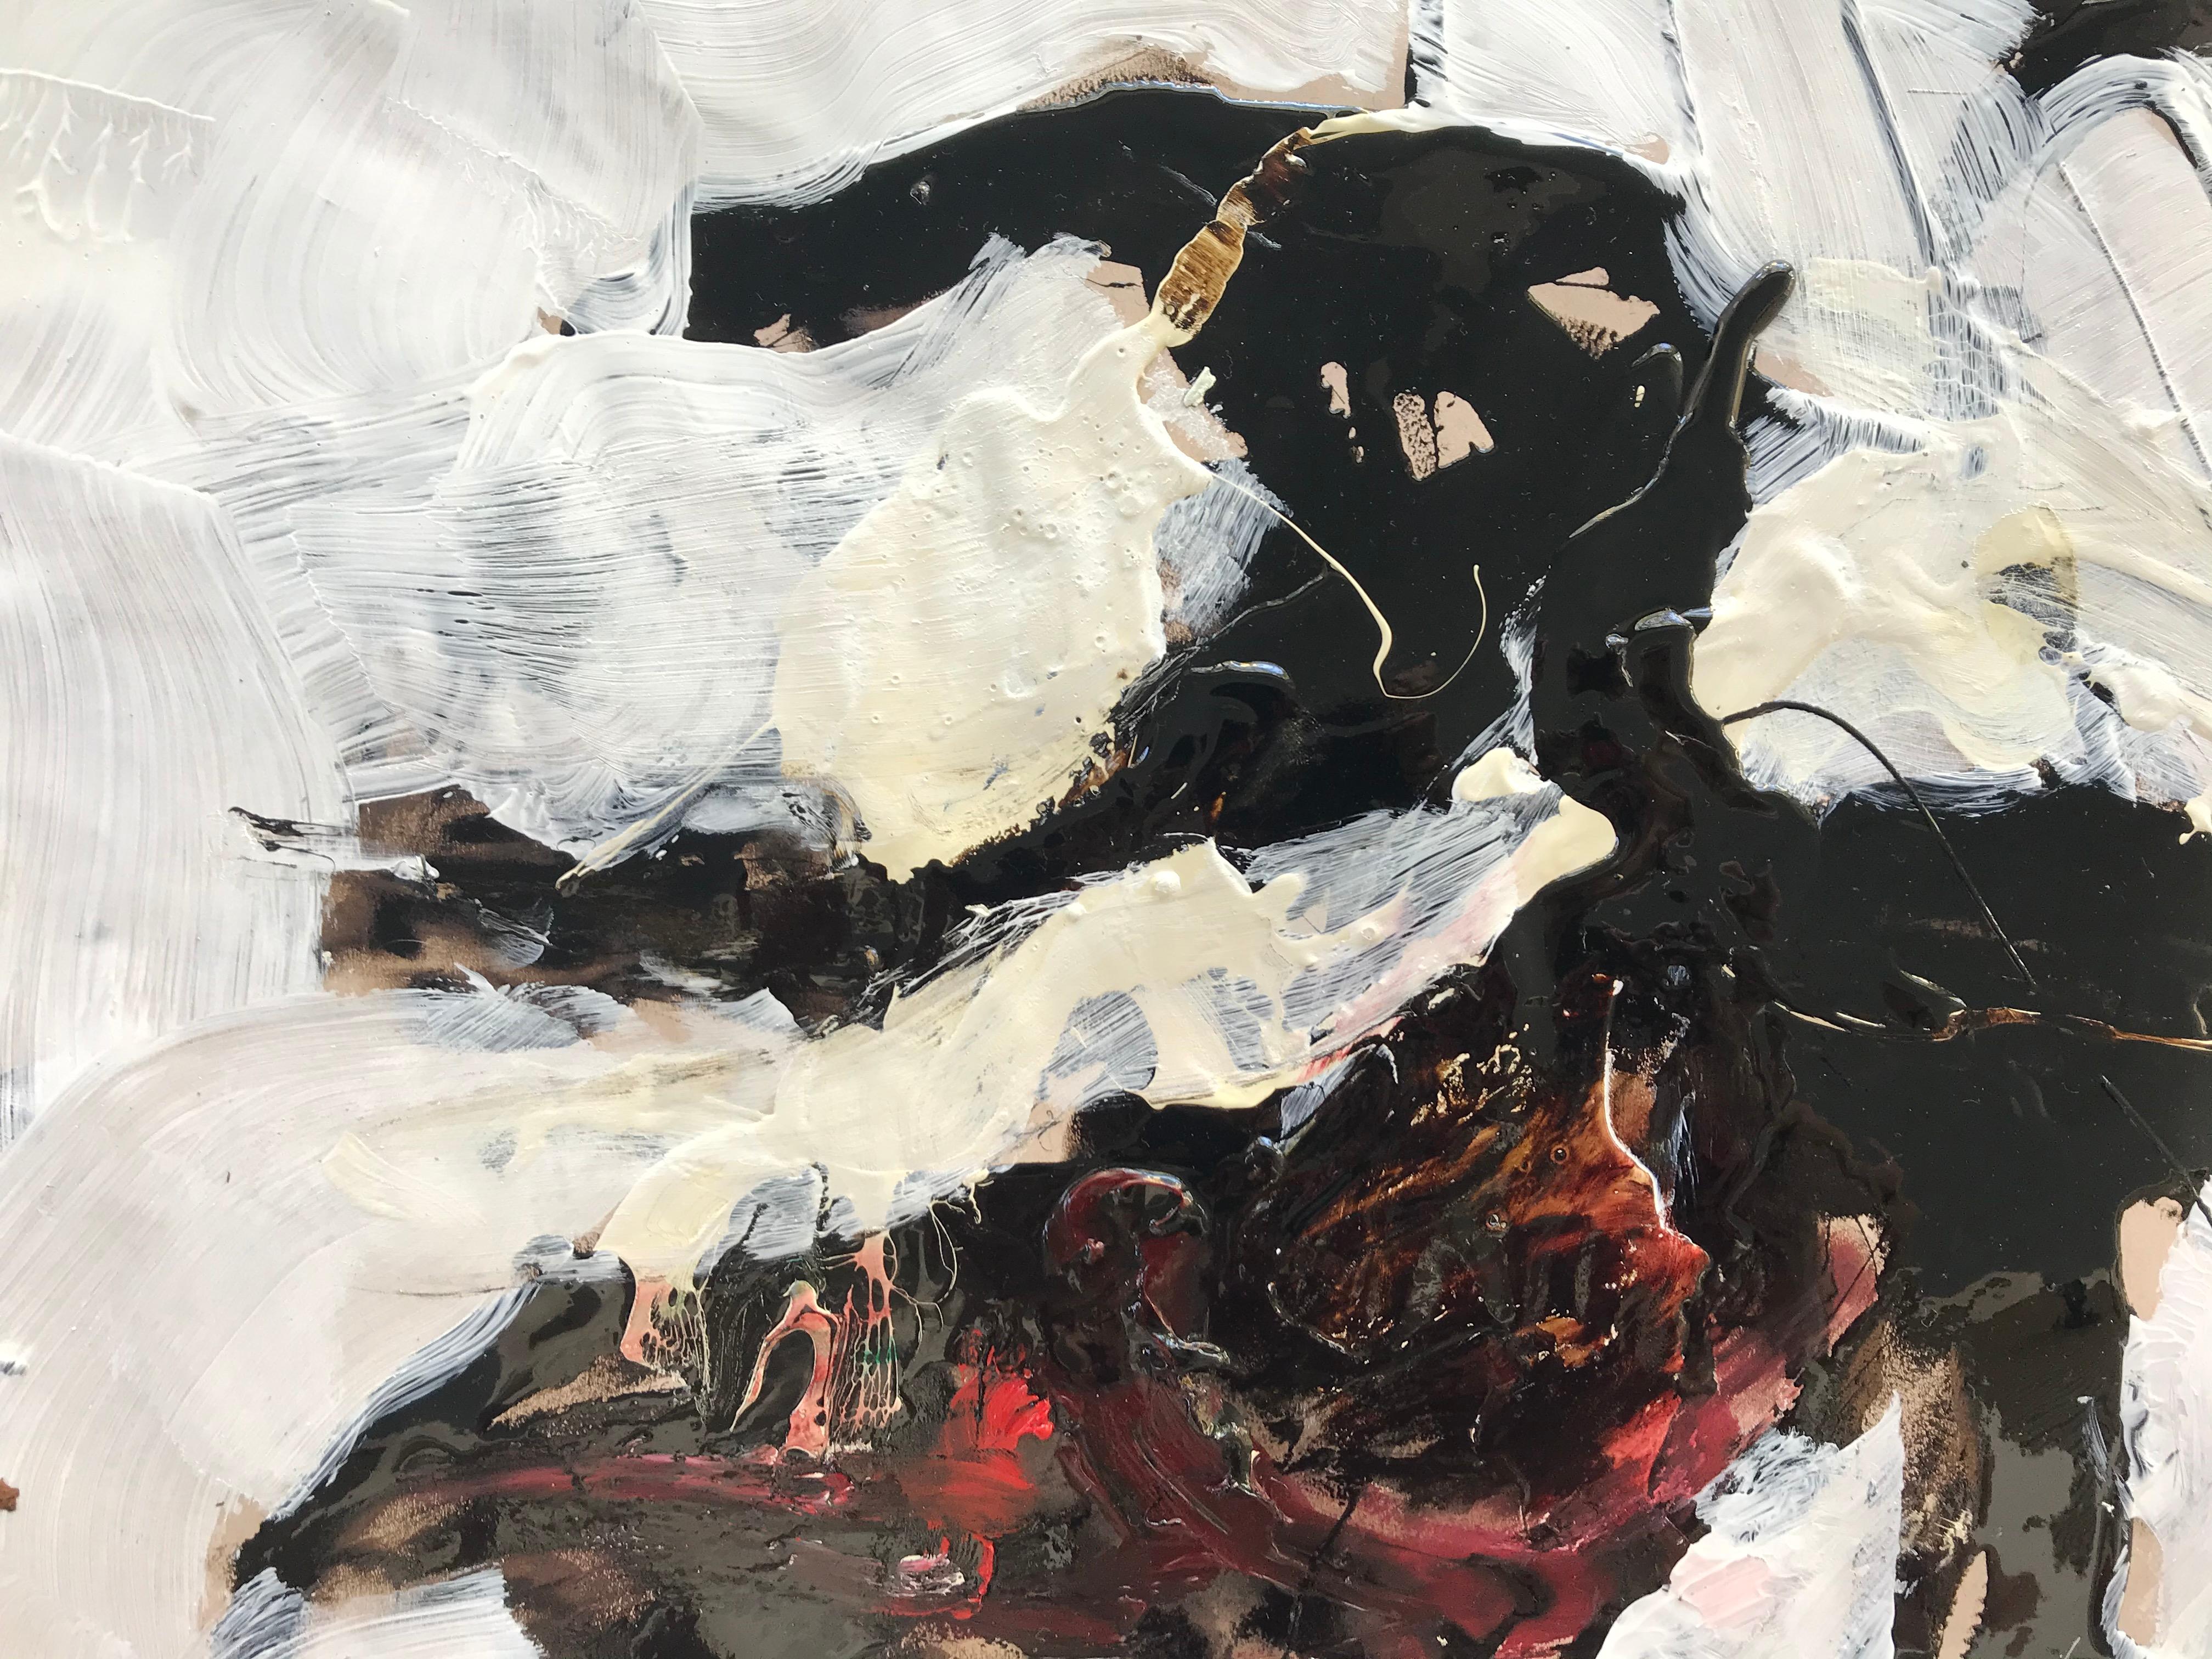 Part of the current series of paintings using tar and housepaint in addition to more conventional artists' media such as oil and acrylic. Free shipping on this piece:

Artist's Statement: 